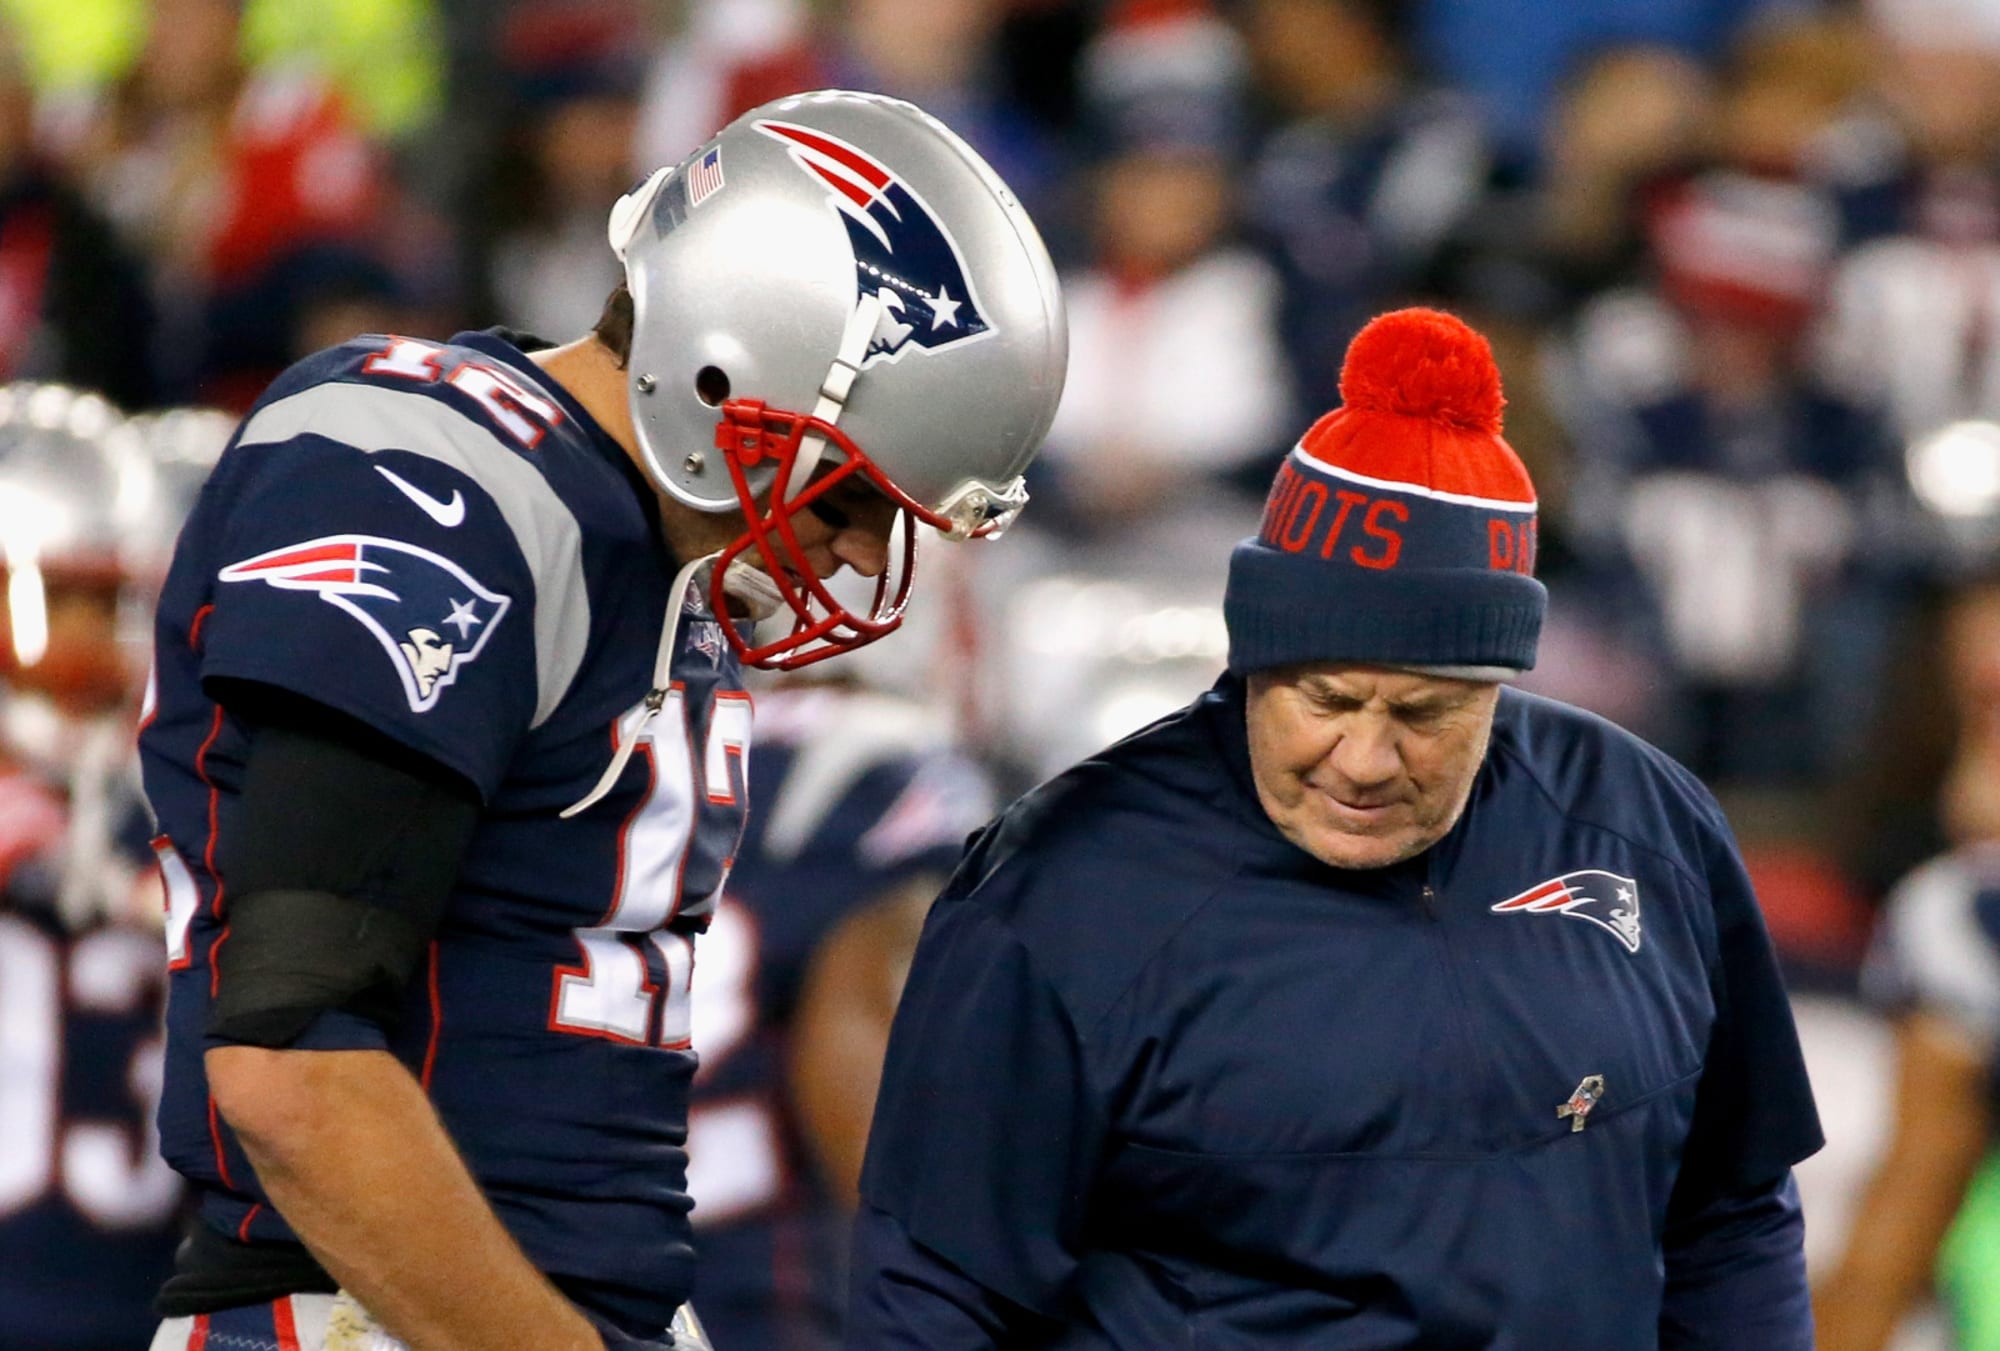 Invoice Belichick and Tom Brady reunite after QB’s most up-to-date endorsement offer